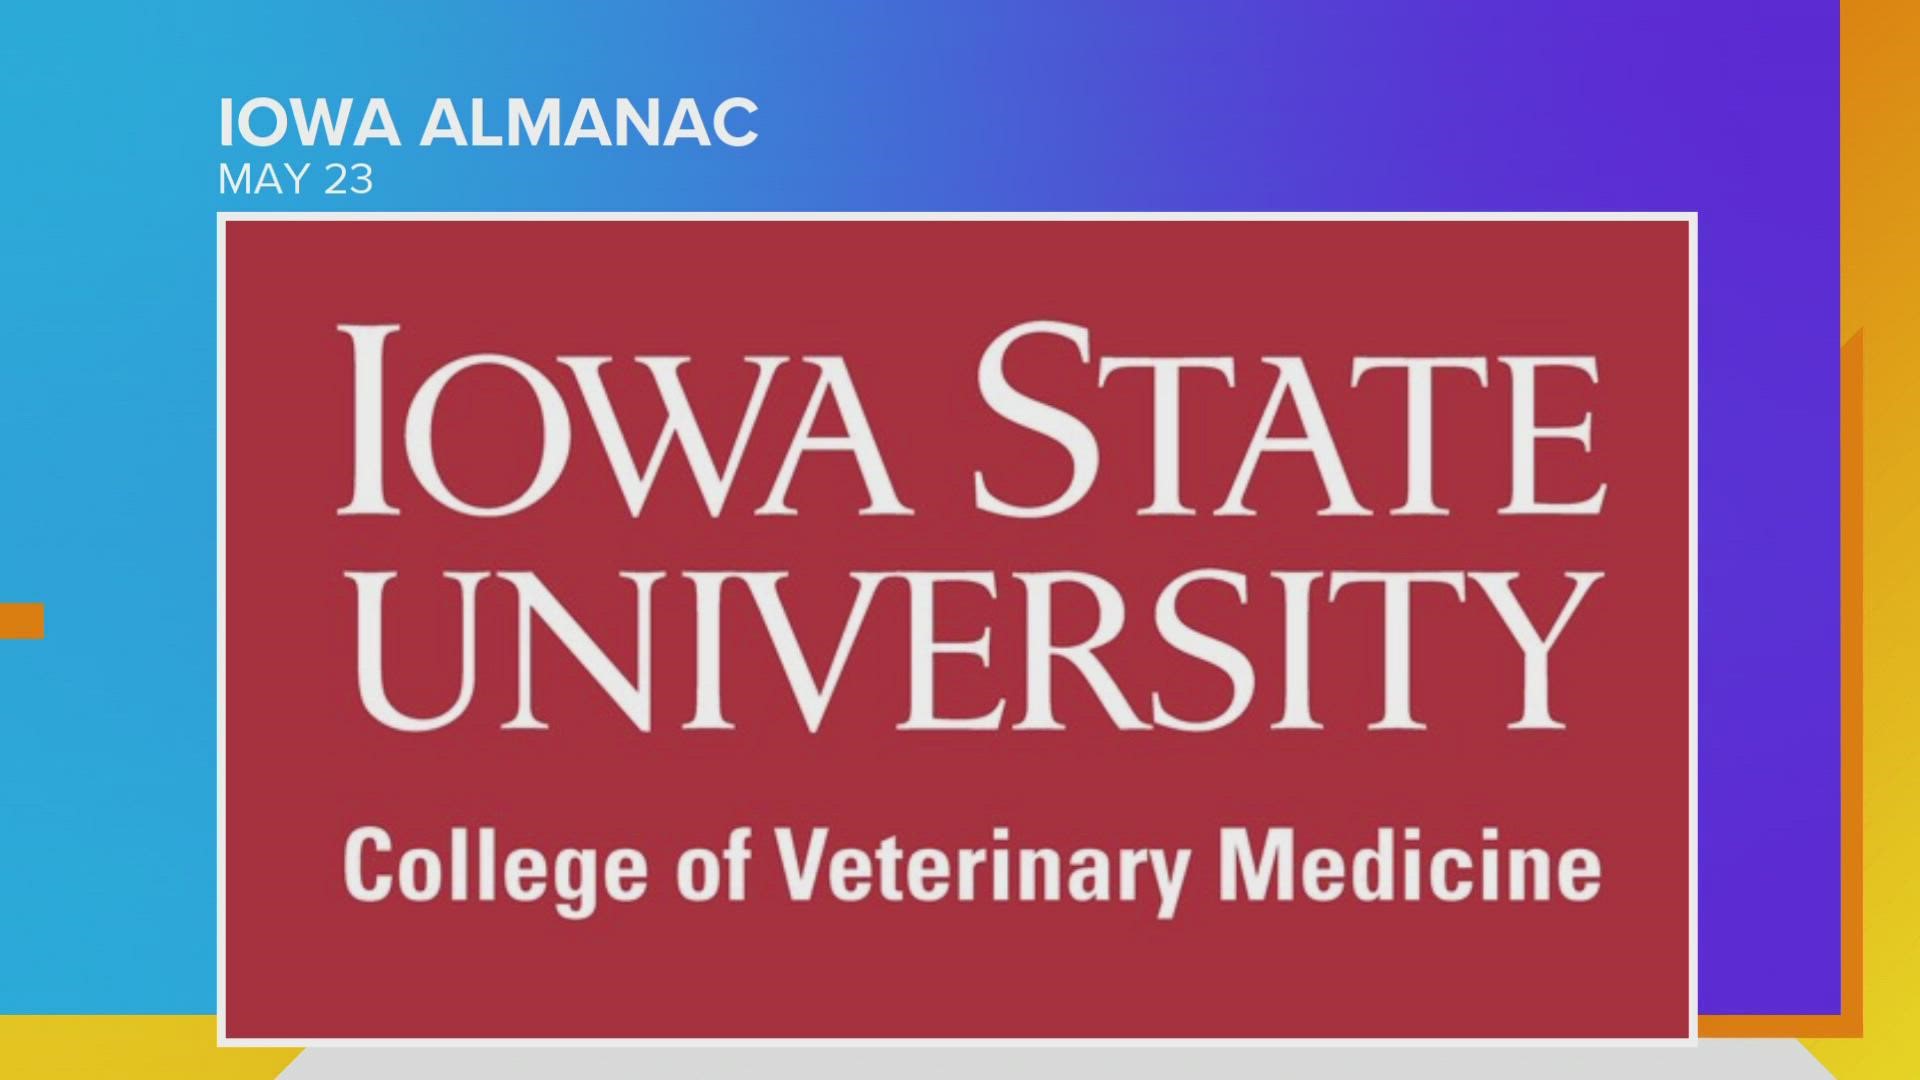 Iowa State University College of Veterinary Medicine was the FIRST state veterinary college in the United States and was established ON THIS DAY, May 23rd in 1879.